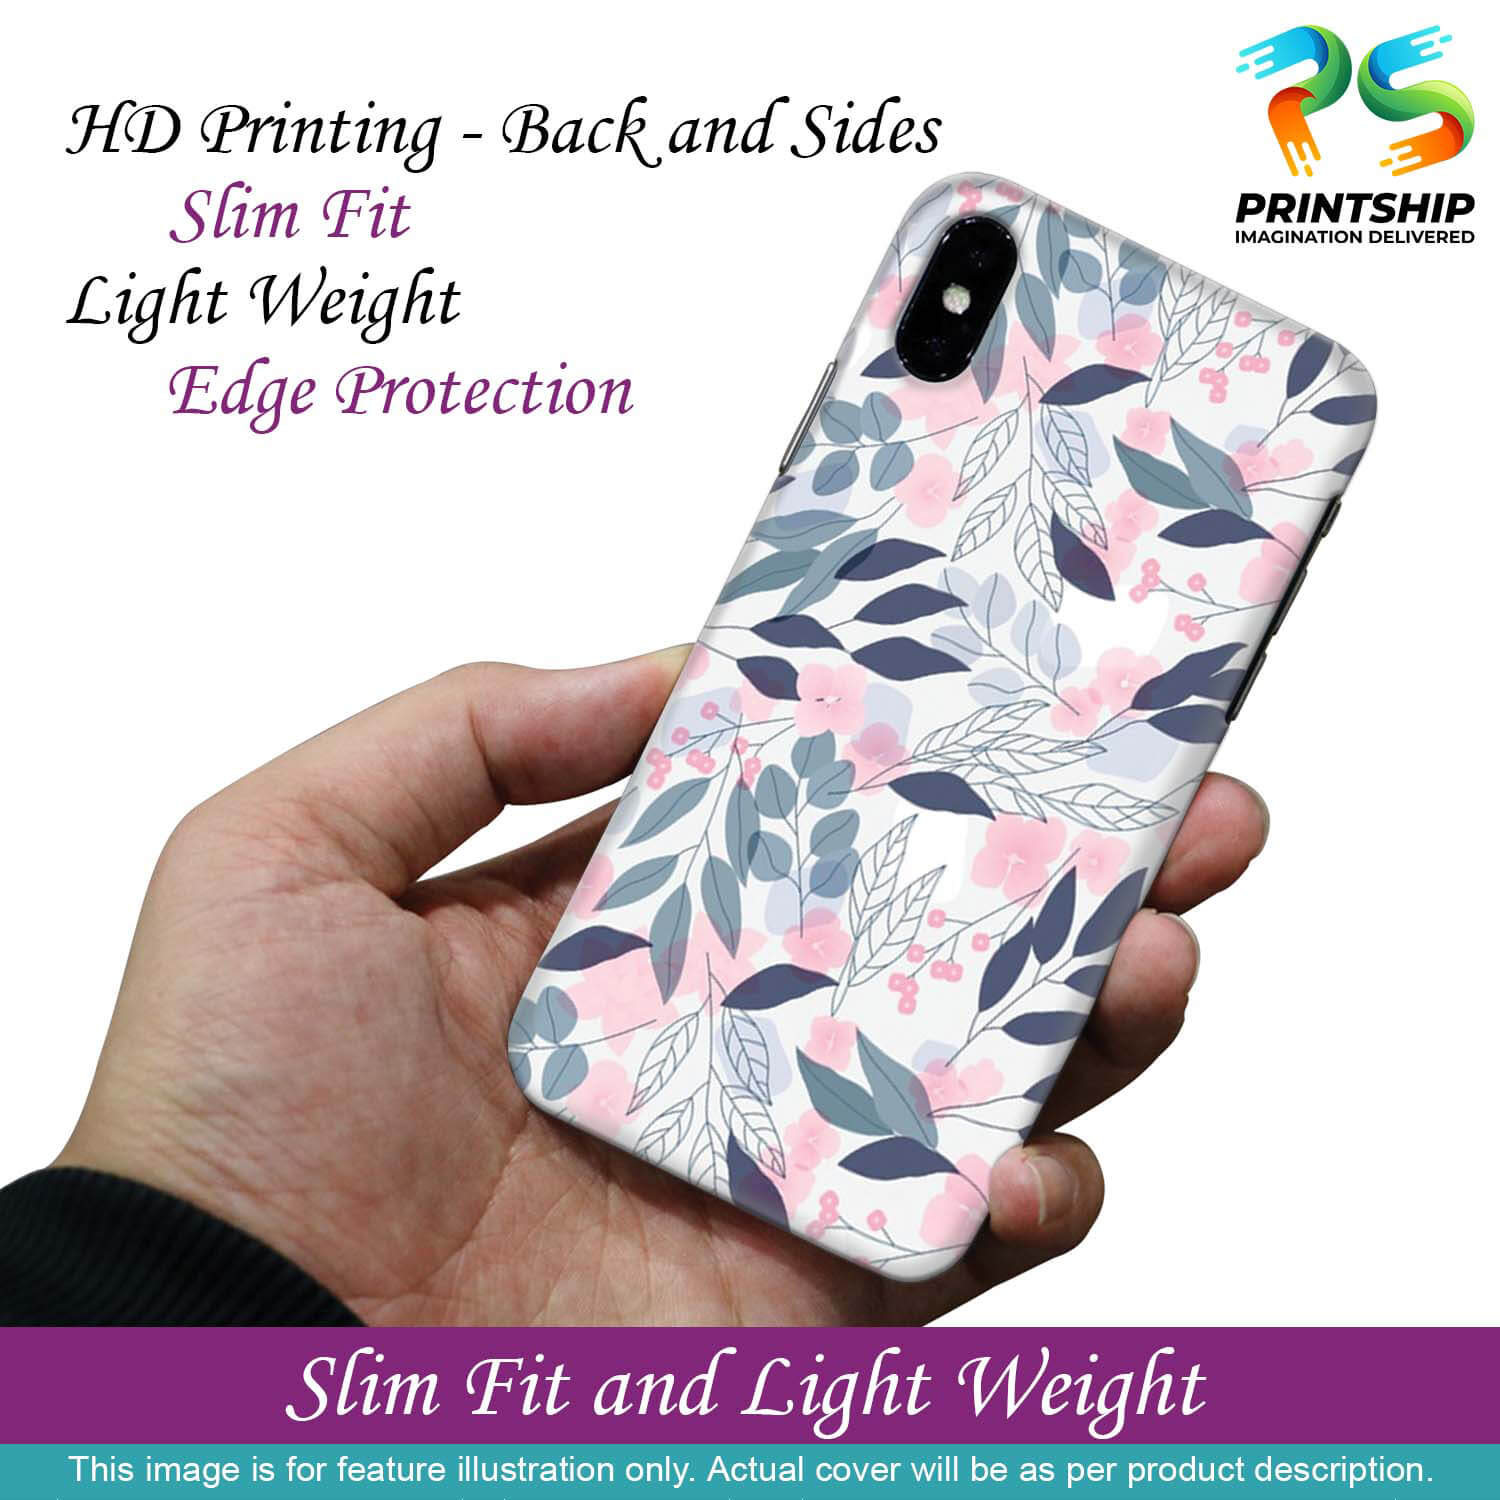 PS1333-Flowery Patterns Back Cover for Realme 9 Pro+